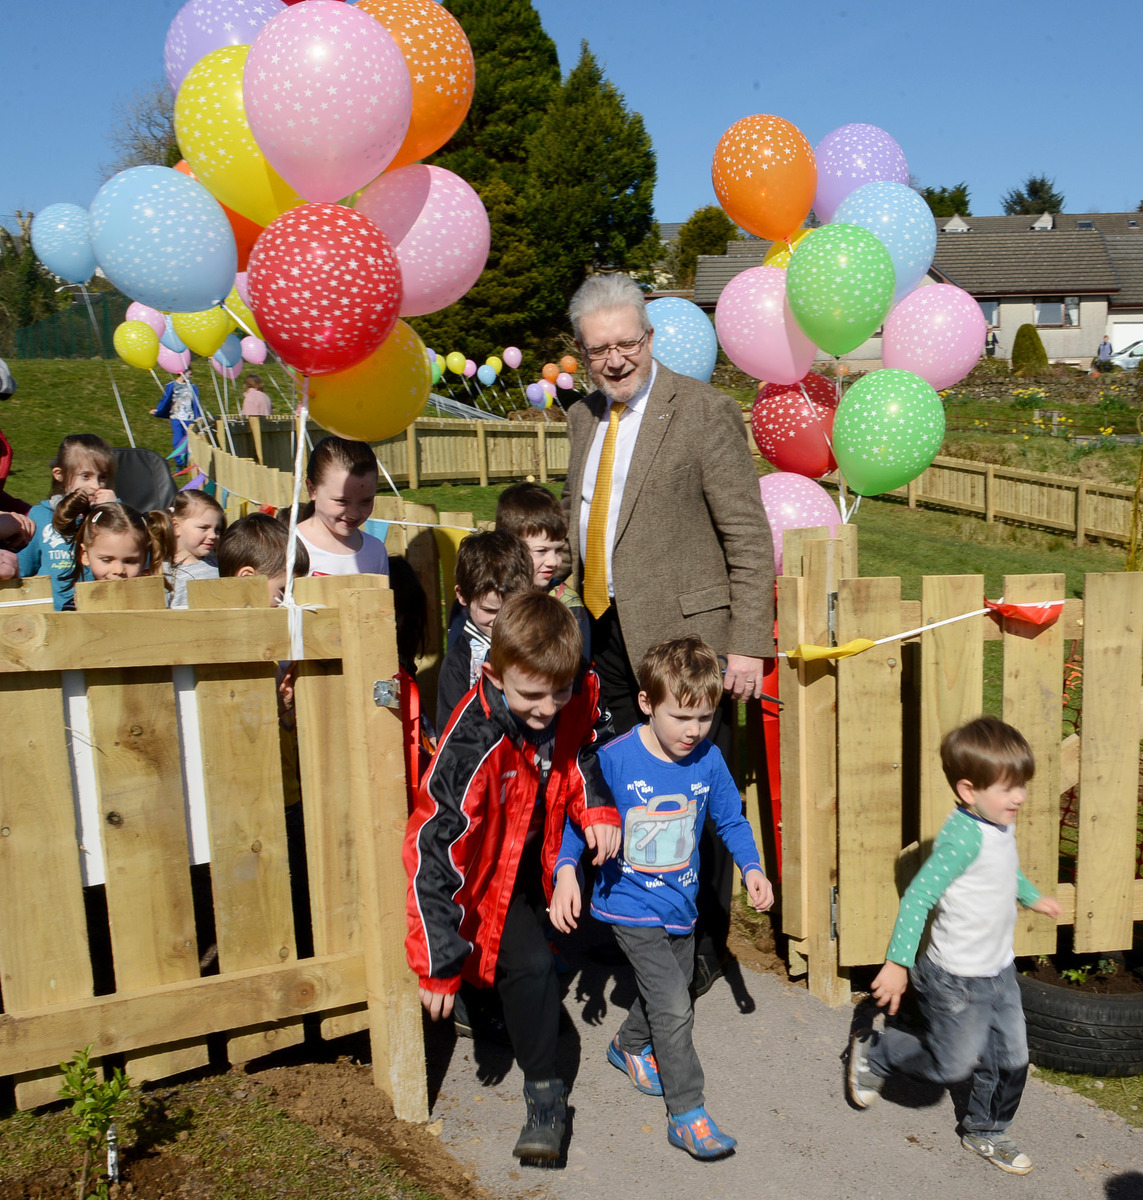 Play park opens with a real celebration